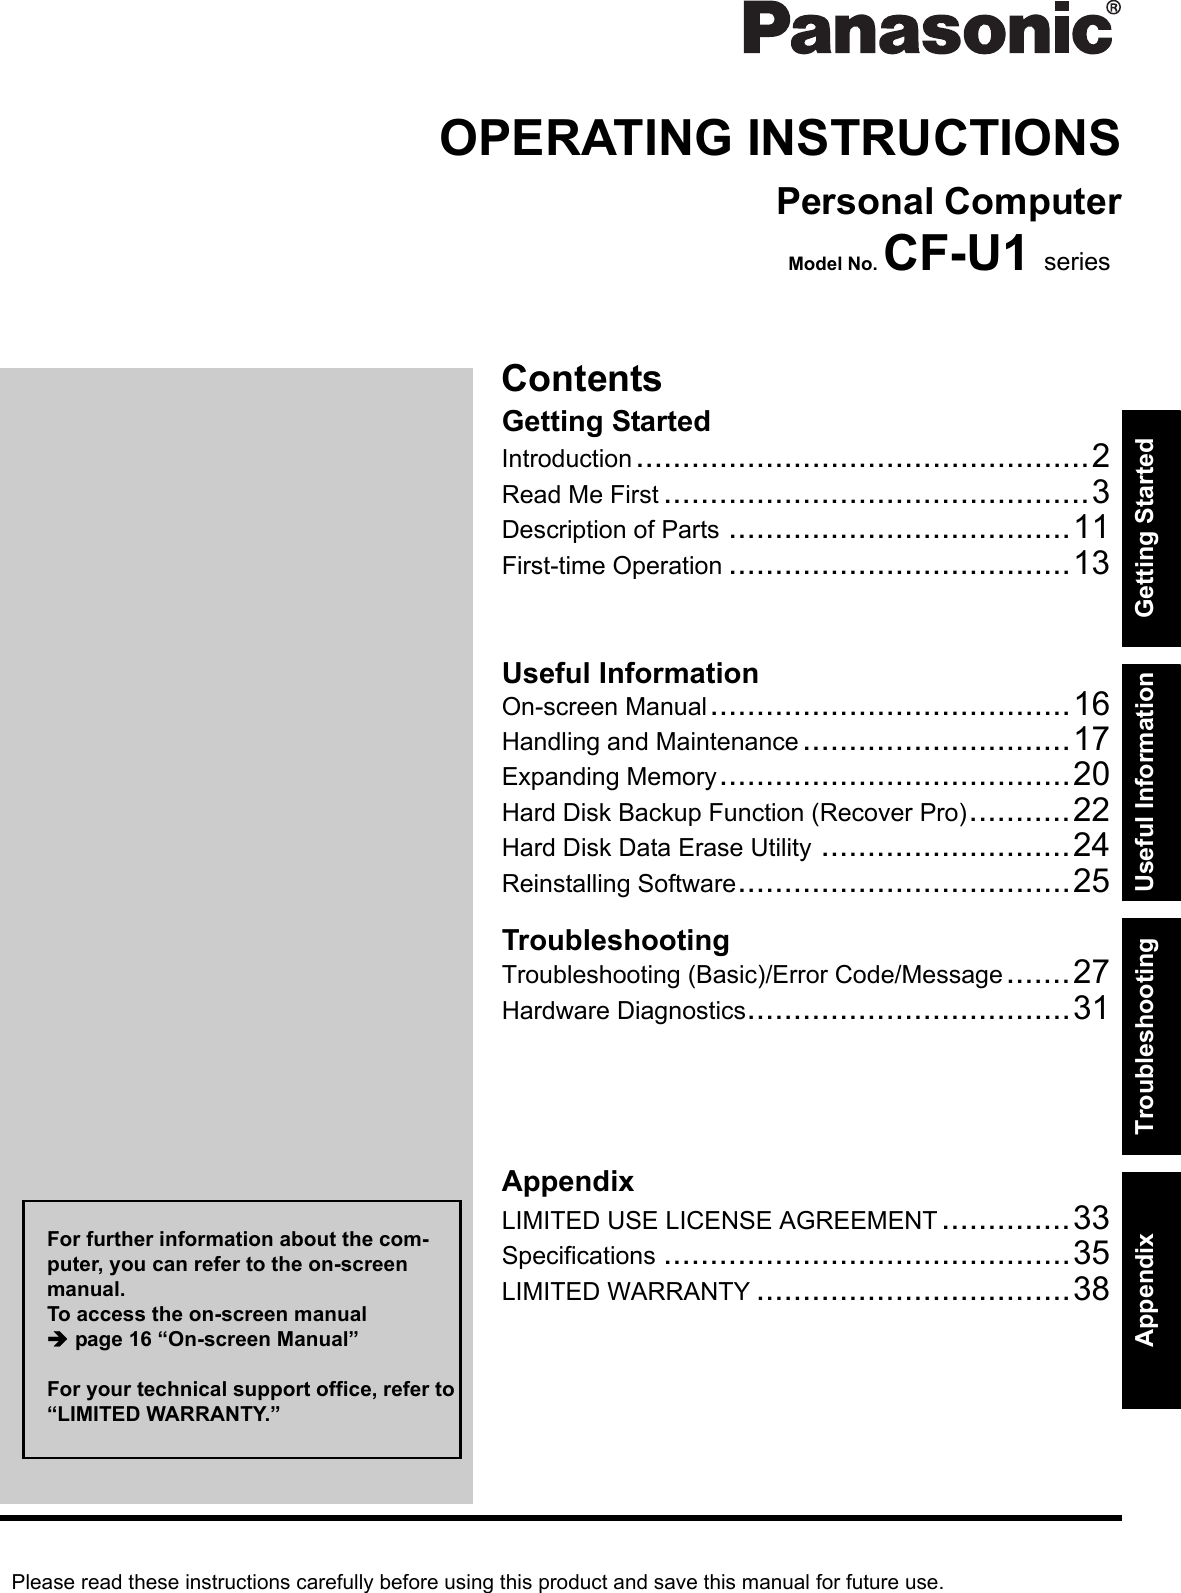 Please read these instructions carefully before using this product and save this manual for future use.ContentsGetting StartedUseful InformationTroubleshootingGetting StartedUseful InformationTroubleshootingAppendixAppendixOPERATING INSTRUCTIONSPersonal ComputerModel No. CF-U1 seriesIntroduction.................................................2Read Me First ..............................................3Description of Parts .....................................11First-time Operation .....................................13On-screen Manual.......................................16Handling and Maintenance.............................17Expanding Memory......................................20Hard Disk Backup Function (Recover Pro)...........22Hard Disk Data Erase Utility ...........................24Reinstalling Software....................................25Troubleshooting (Basic)/Error Code/Message.......27Hardware Diagnostics...................................31LIMITED USE LICENSE AGREEMENT..............33Specifications ............................................35LIMITED WARRANTY ..................................38For further information about the com-puter, you can refer to the on-screen manual.To access the on-screen manual page 16 “On-screen Manual”For your technical support office, refer to “LIMITED WARRANTY.”